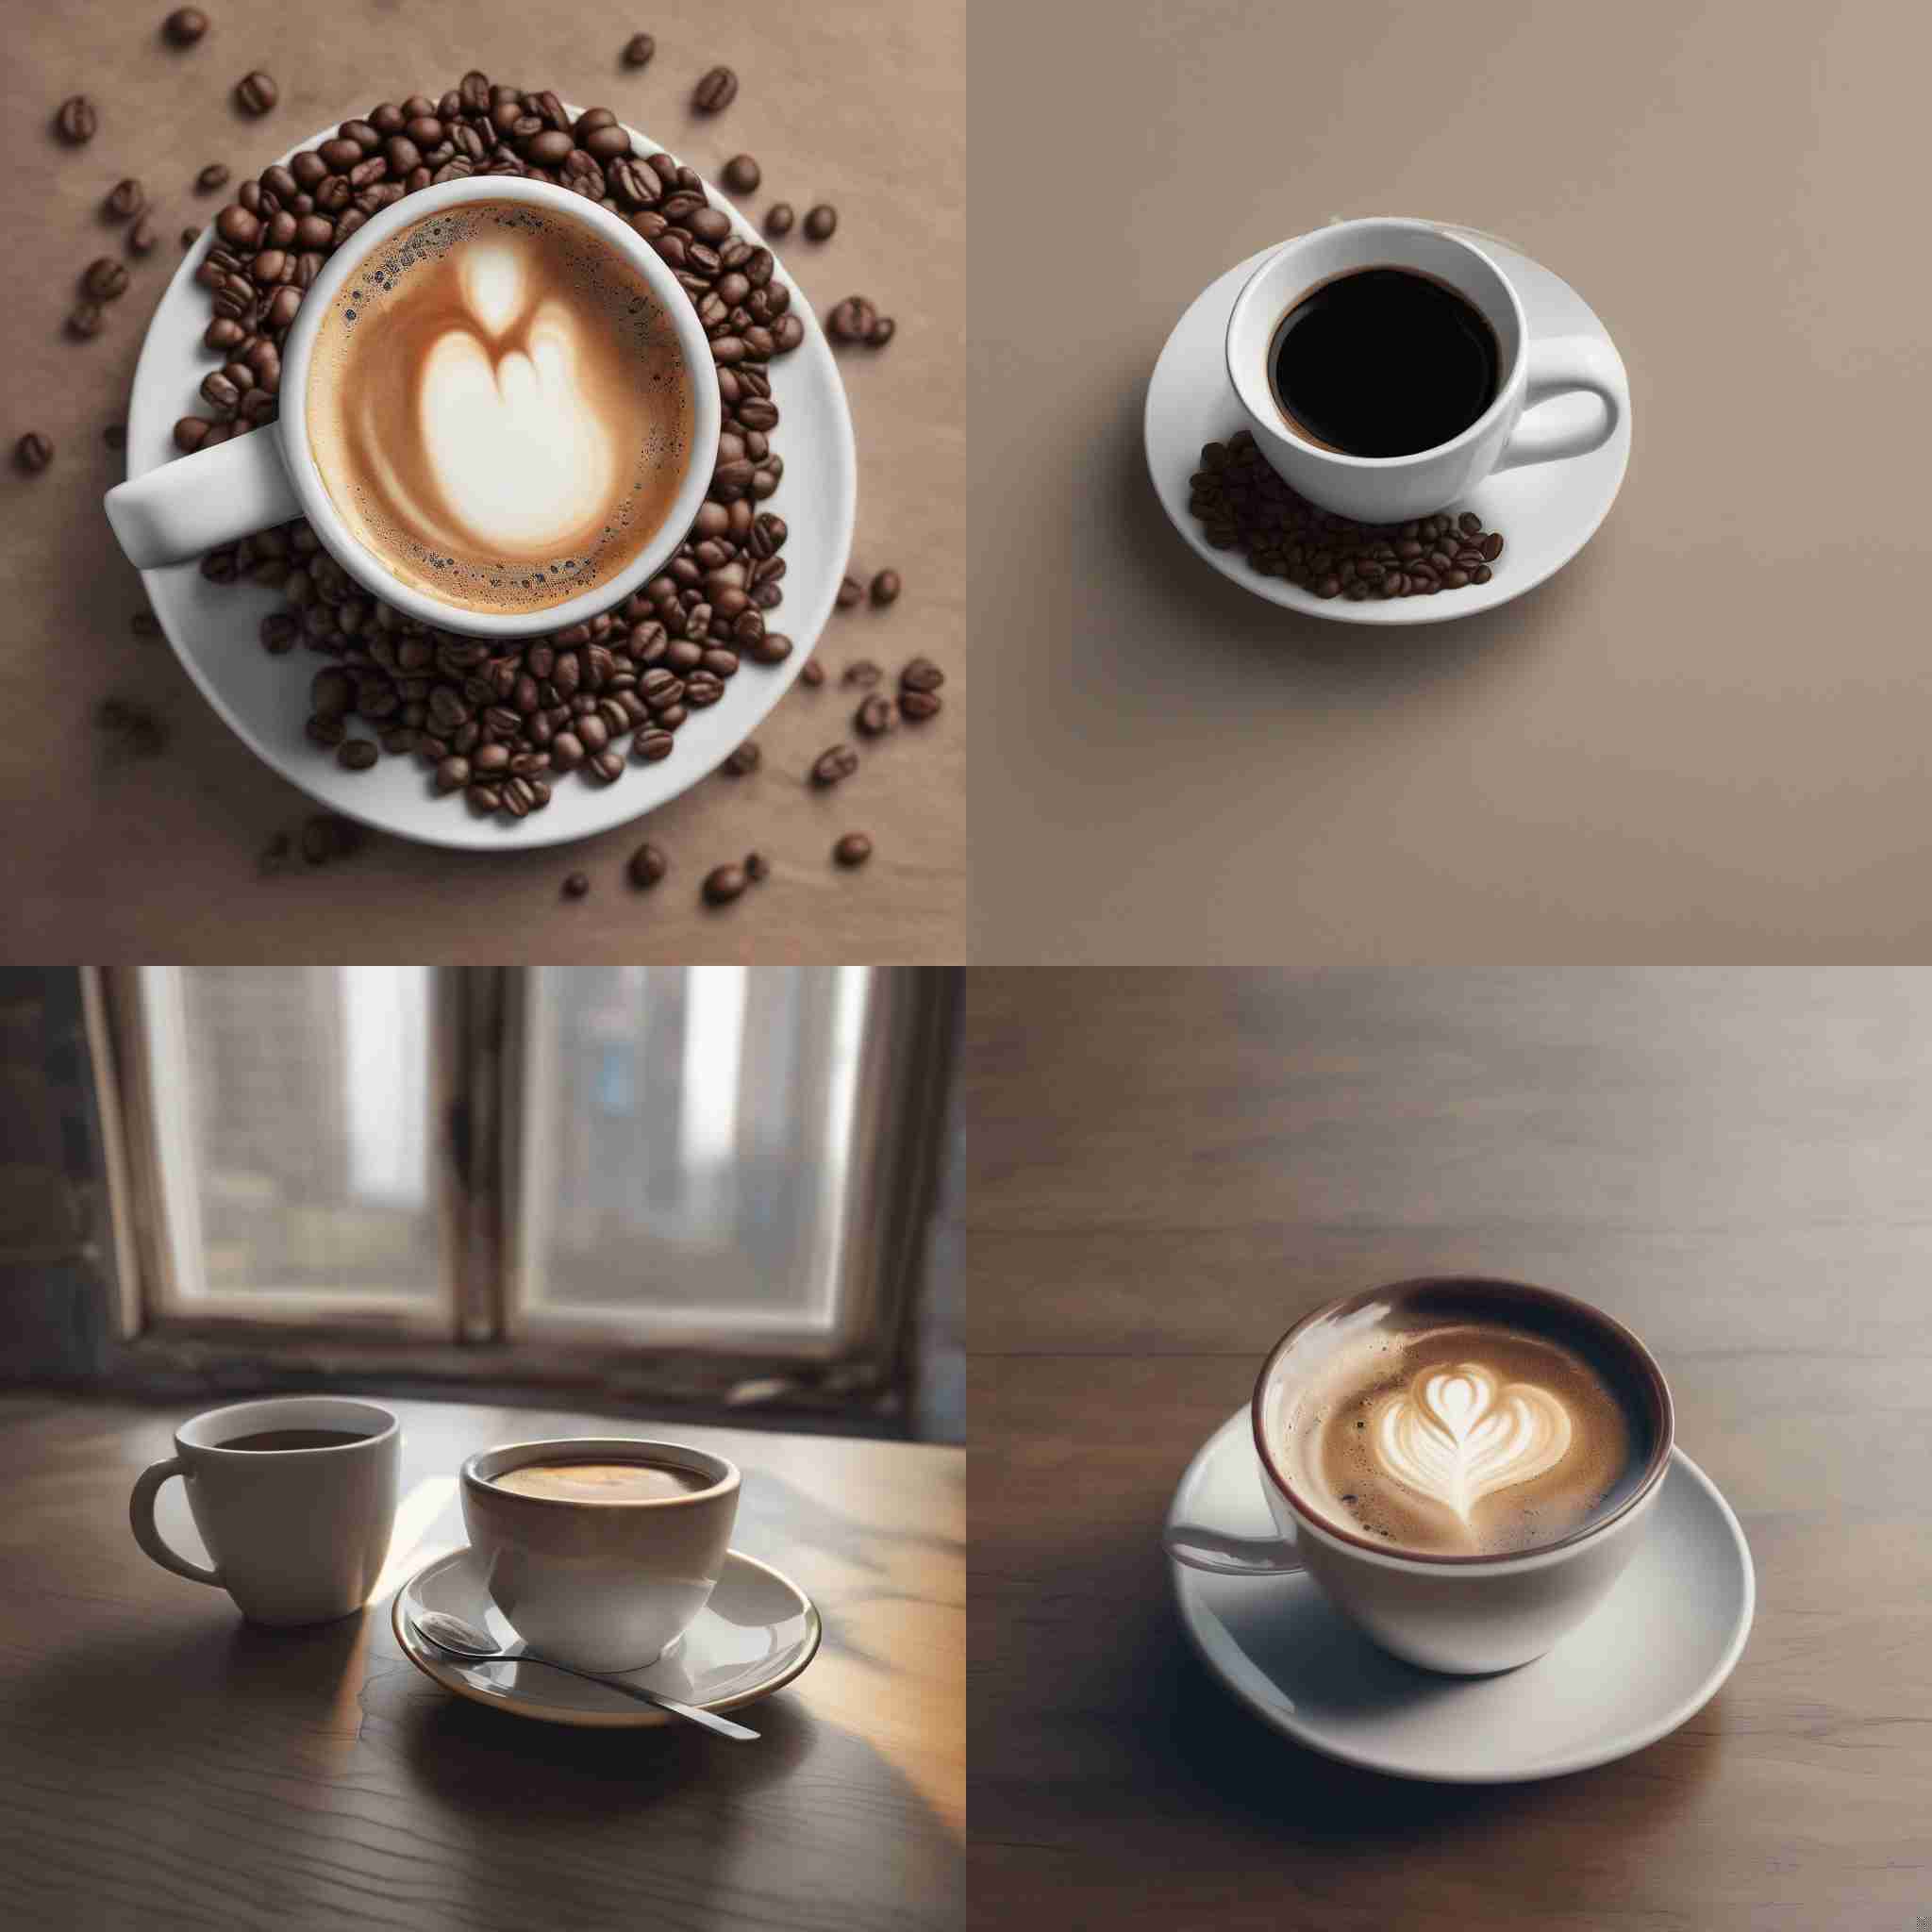 A cup of coffee with no milk